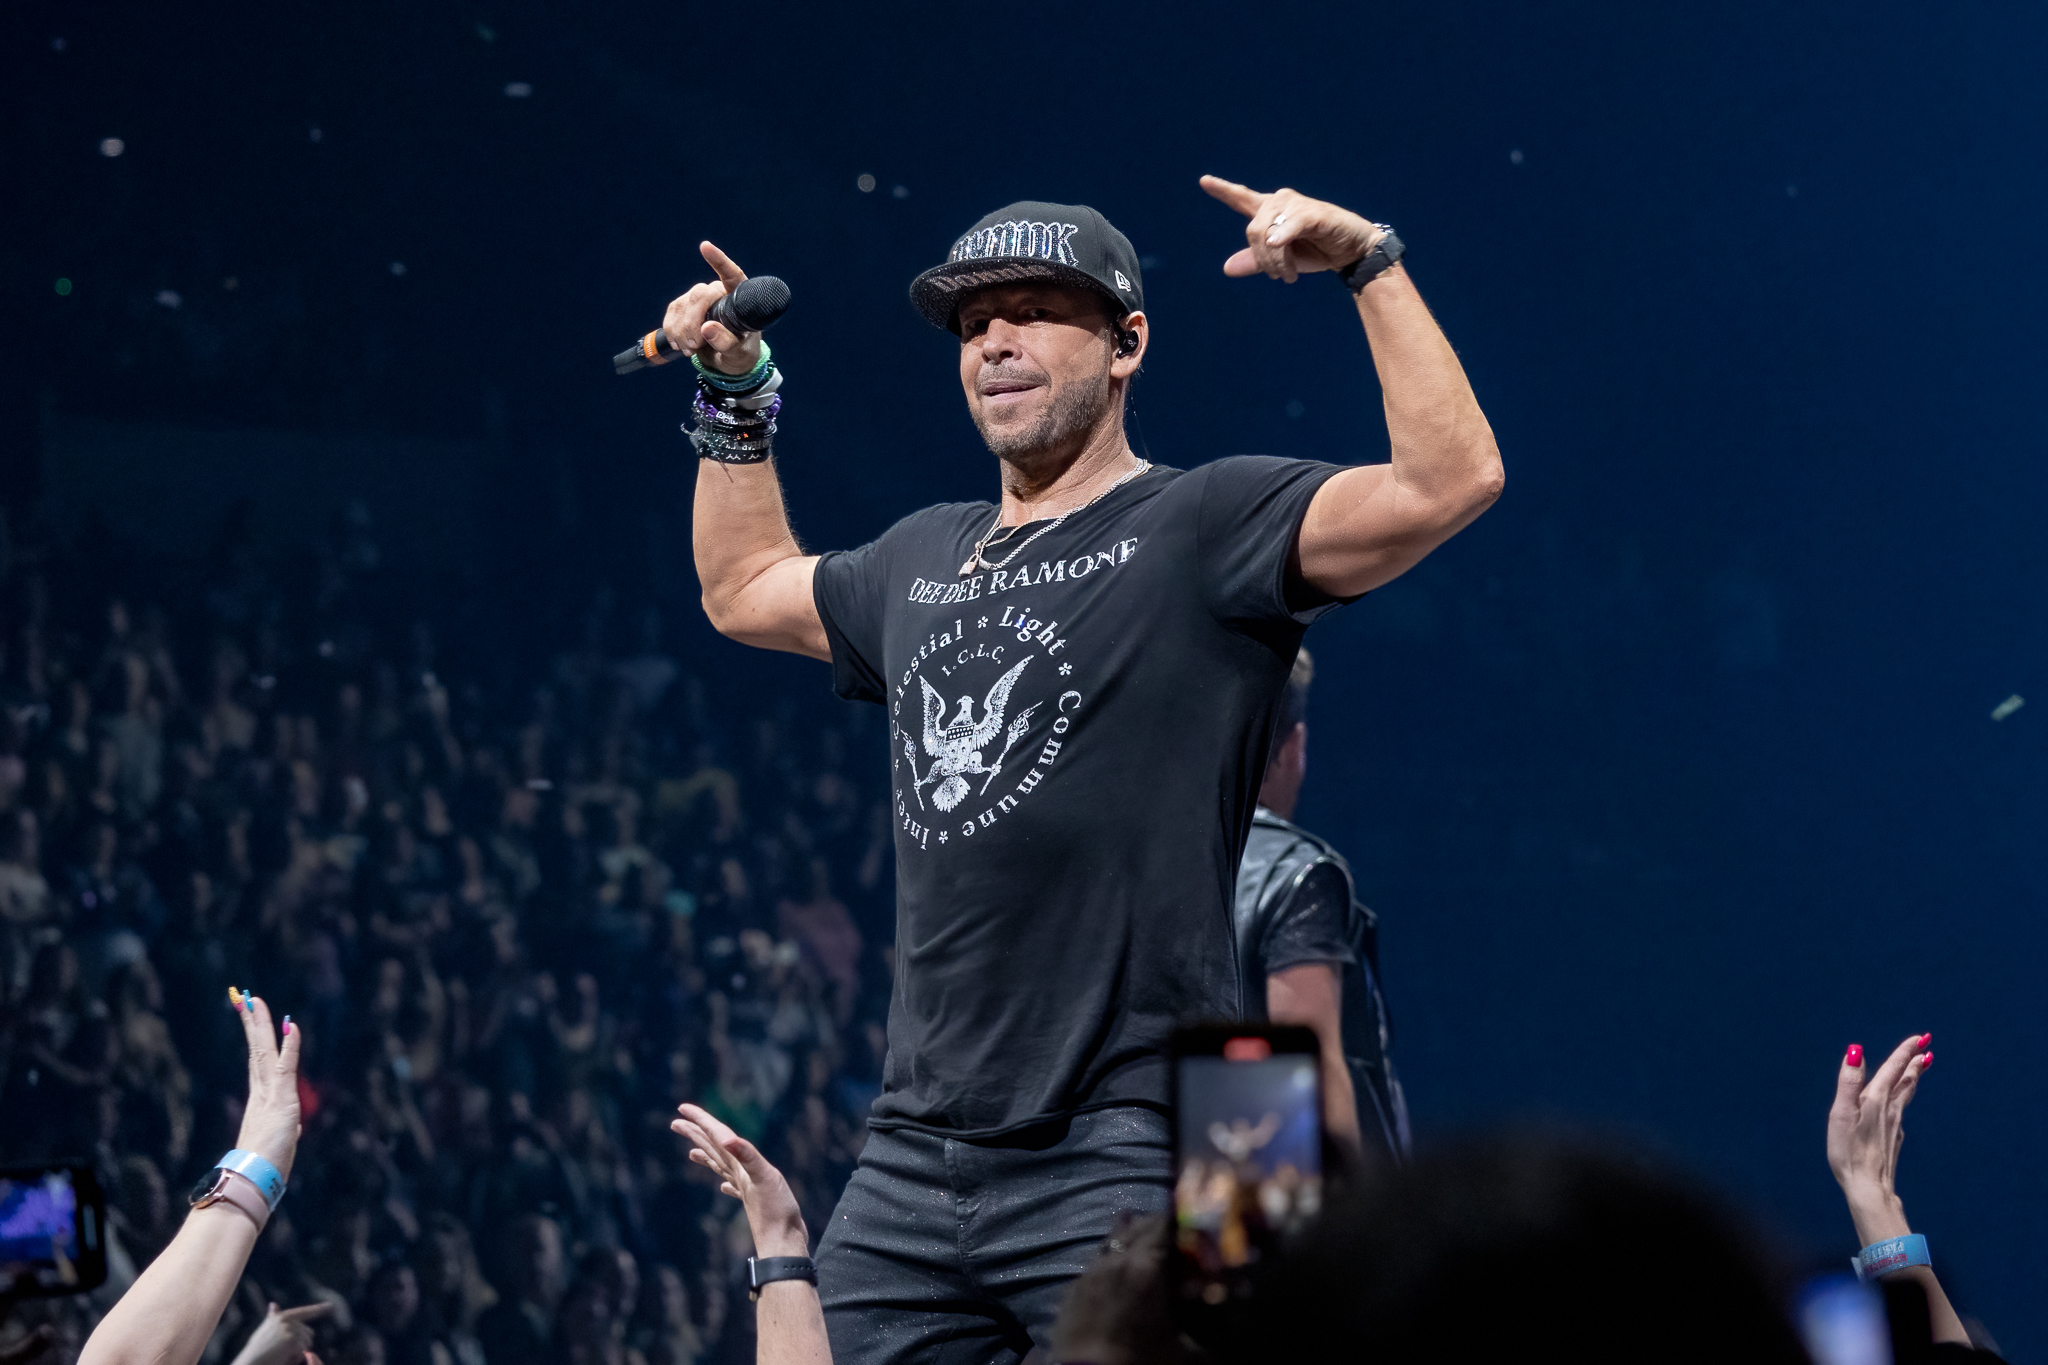 New Kids on the Block perform at Moda Center in Portland, OR on June 5, 2022.